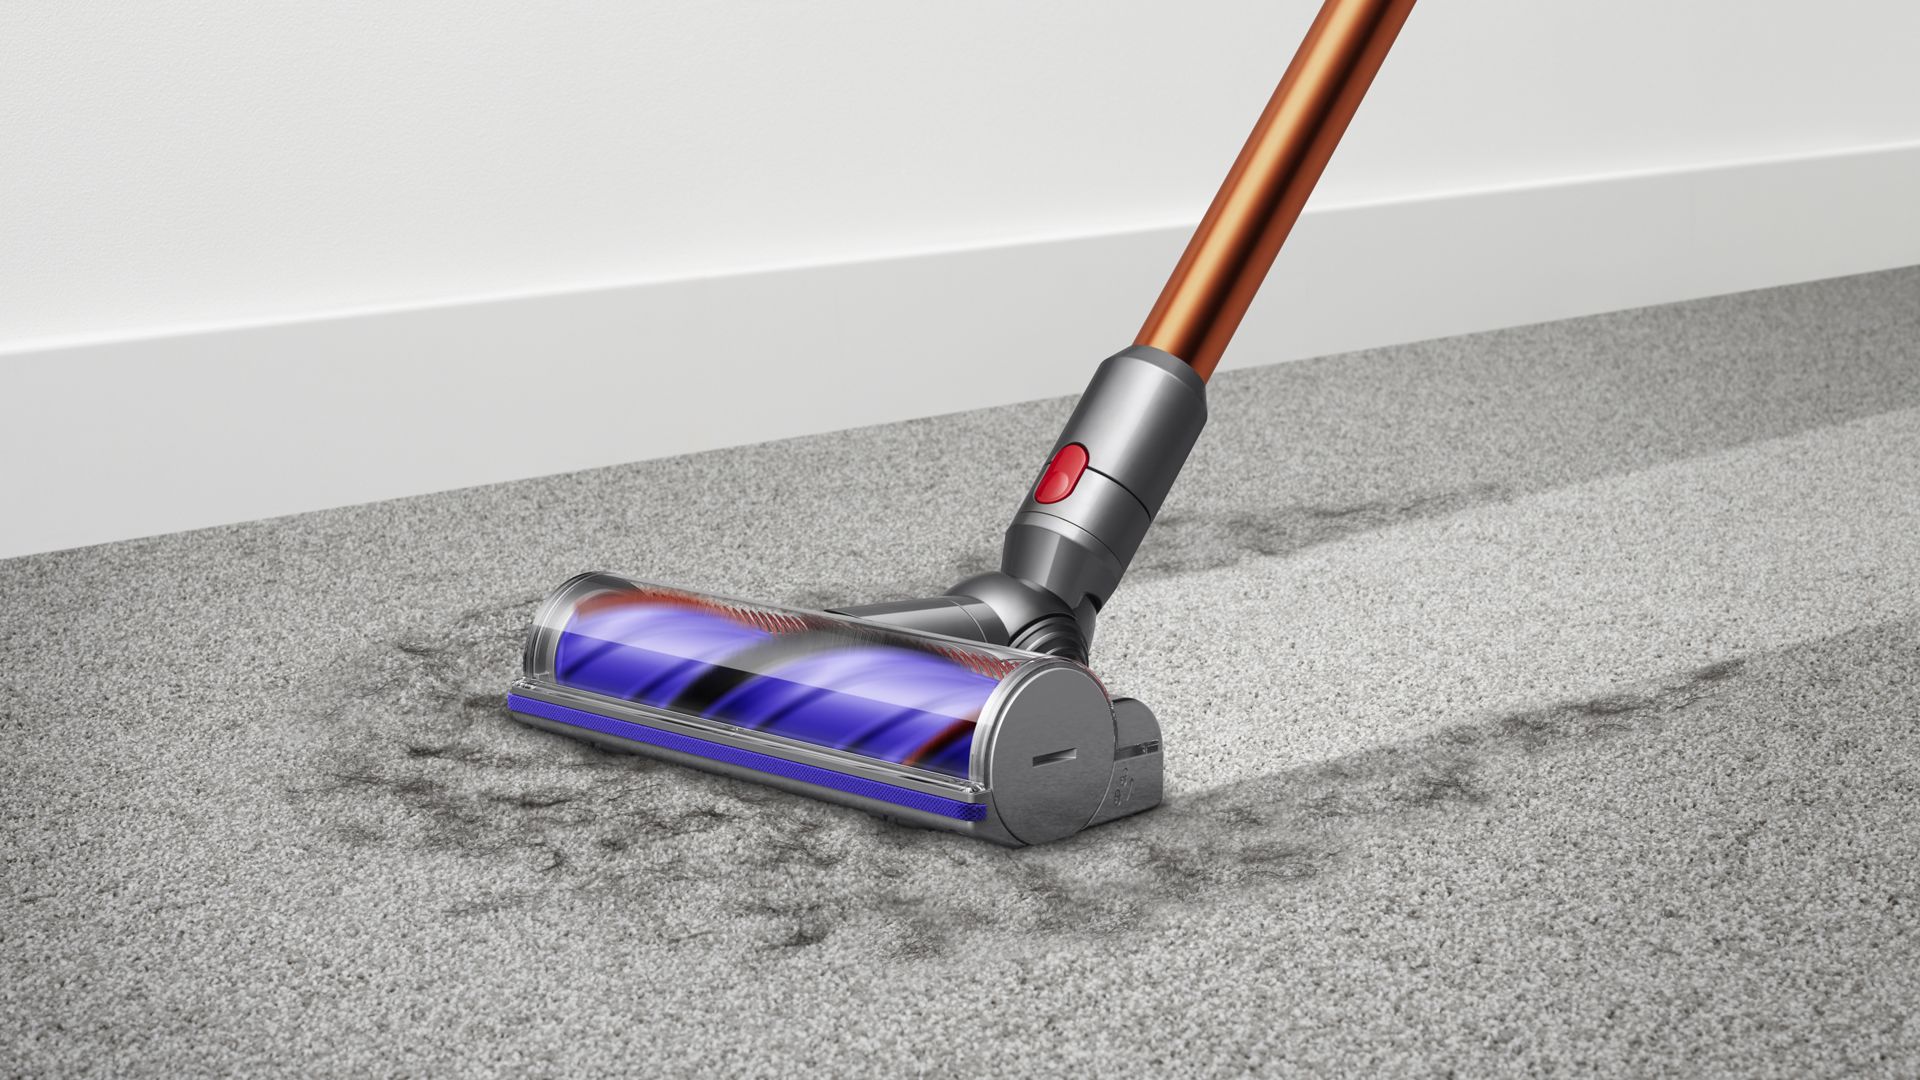 Buy the Dyson V10™ vacuum cleaner (Nickel Copper)| Dyson